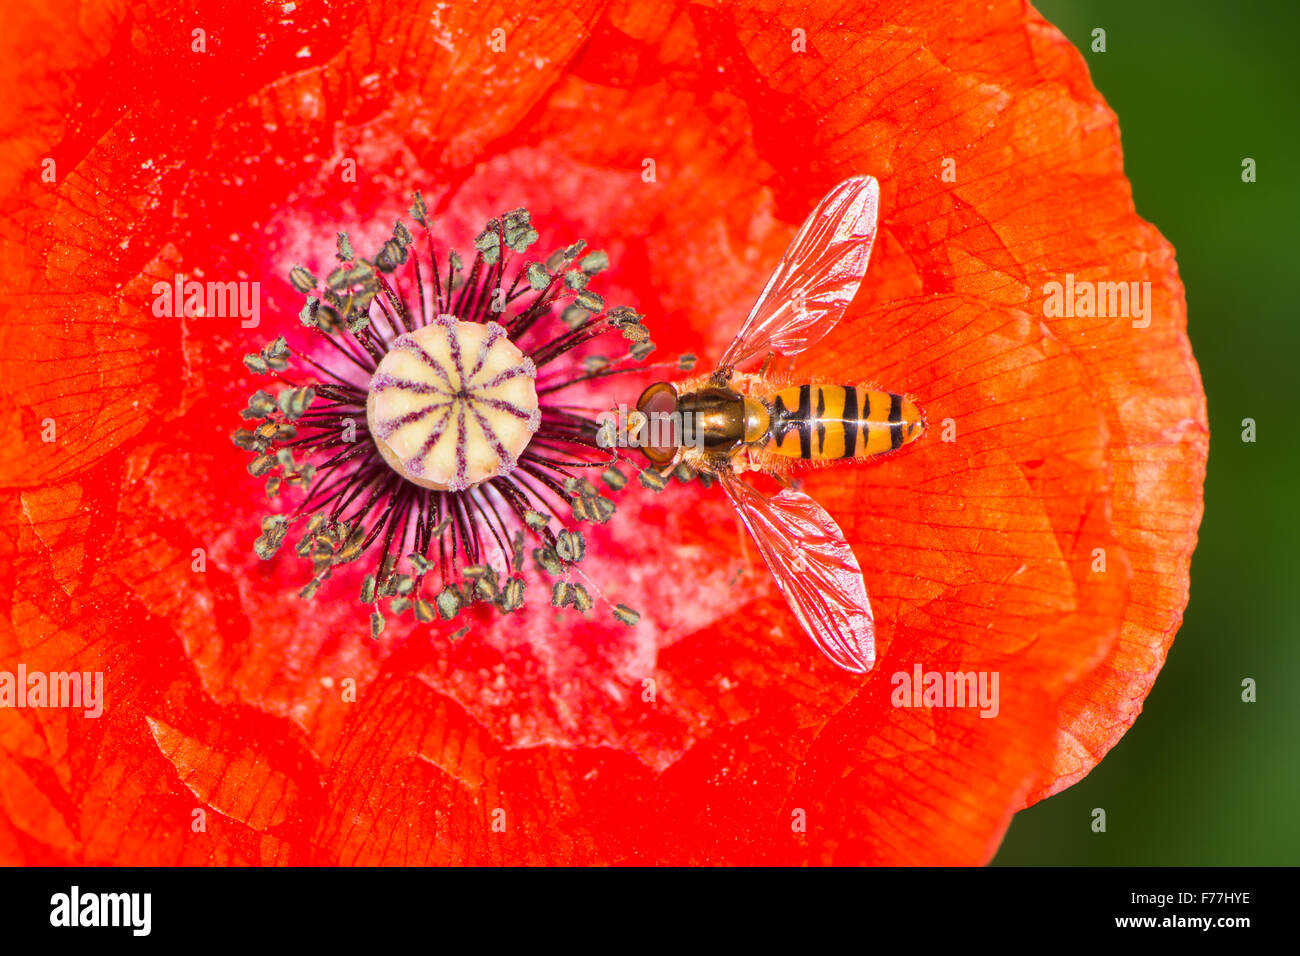 Hovefly collecting nectar in the blossom of red poppy flower Stock Photo